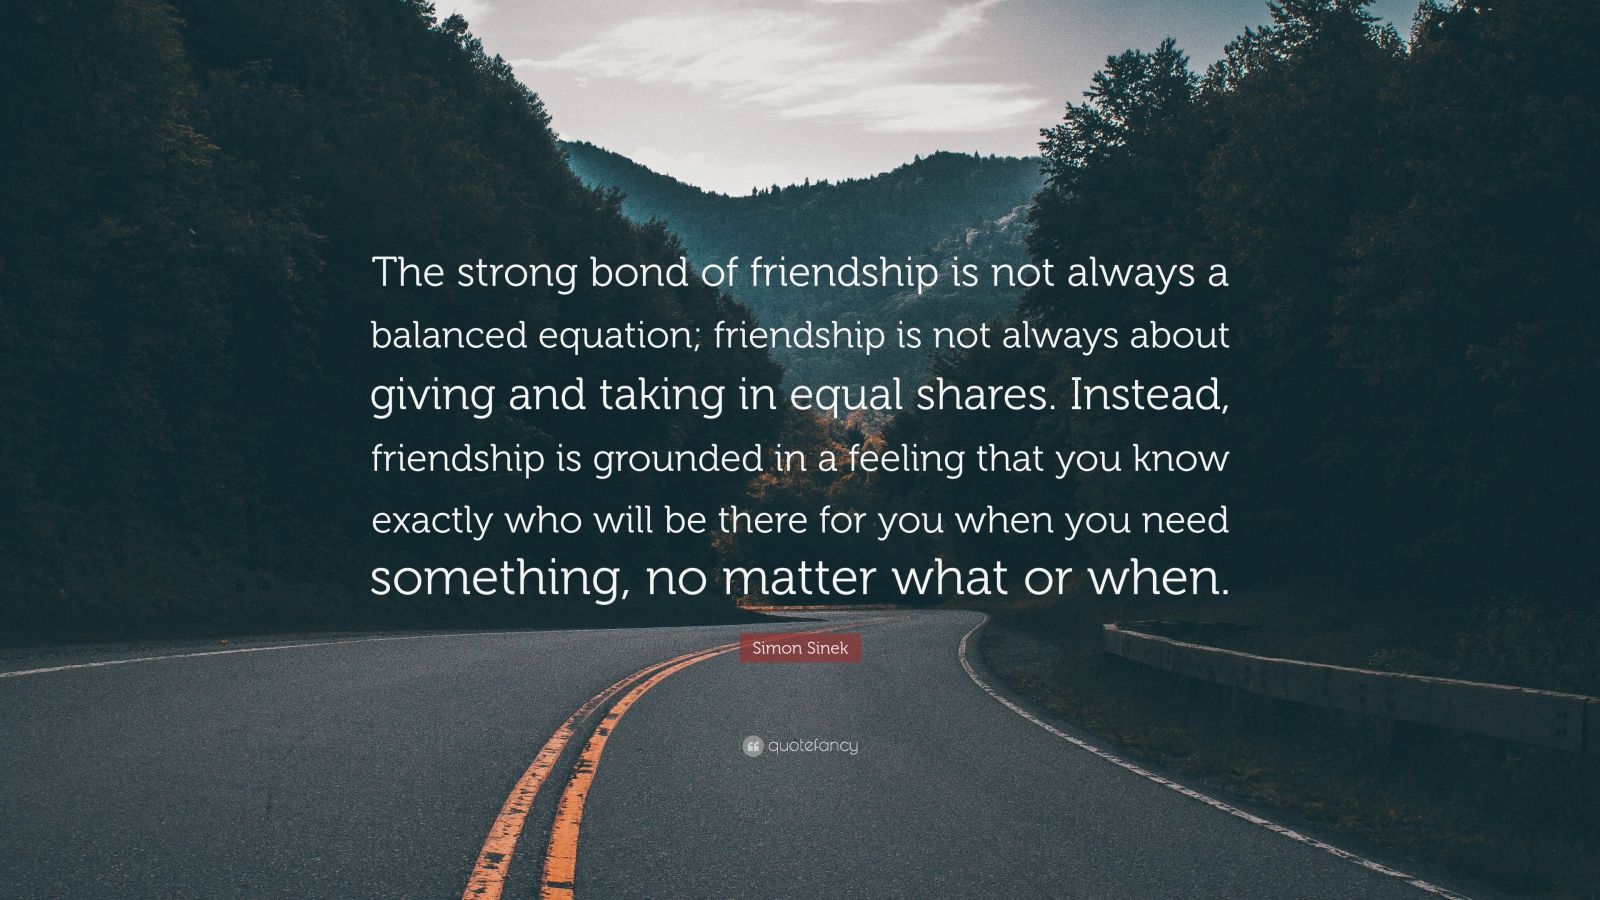 Simon Sinek Quote: “The strong bond of friendship is not always a ...